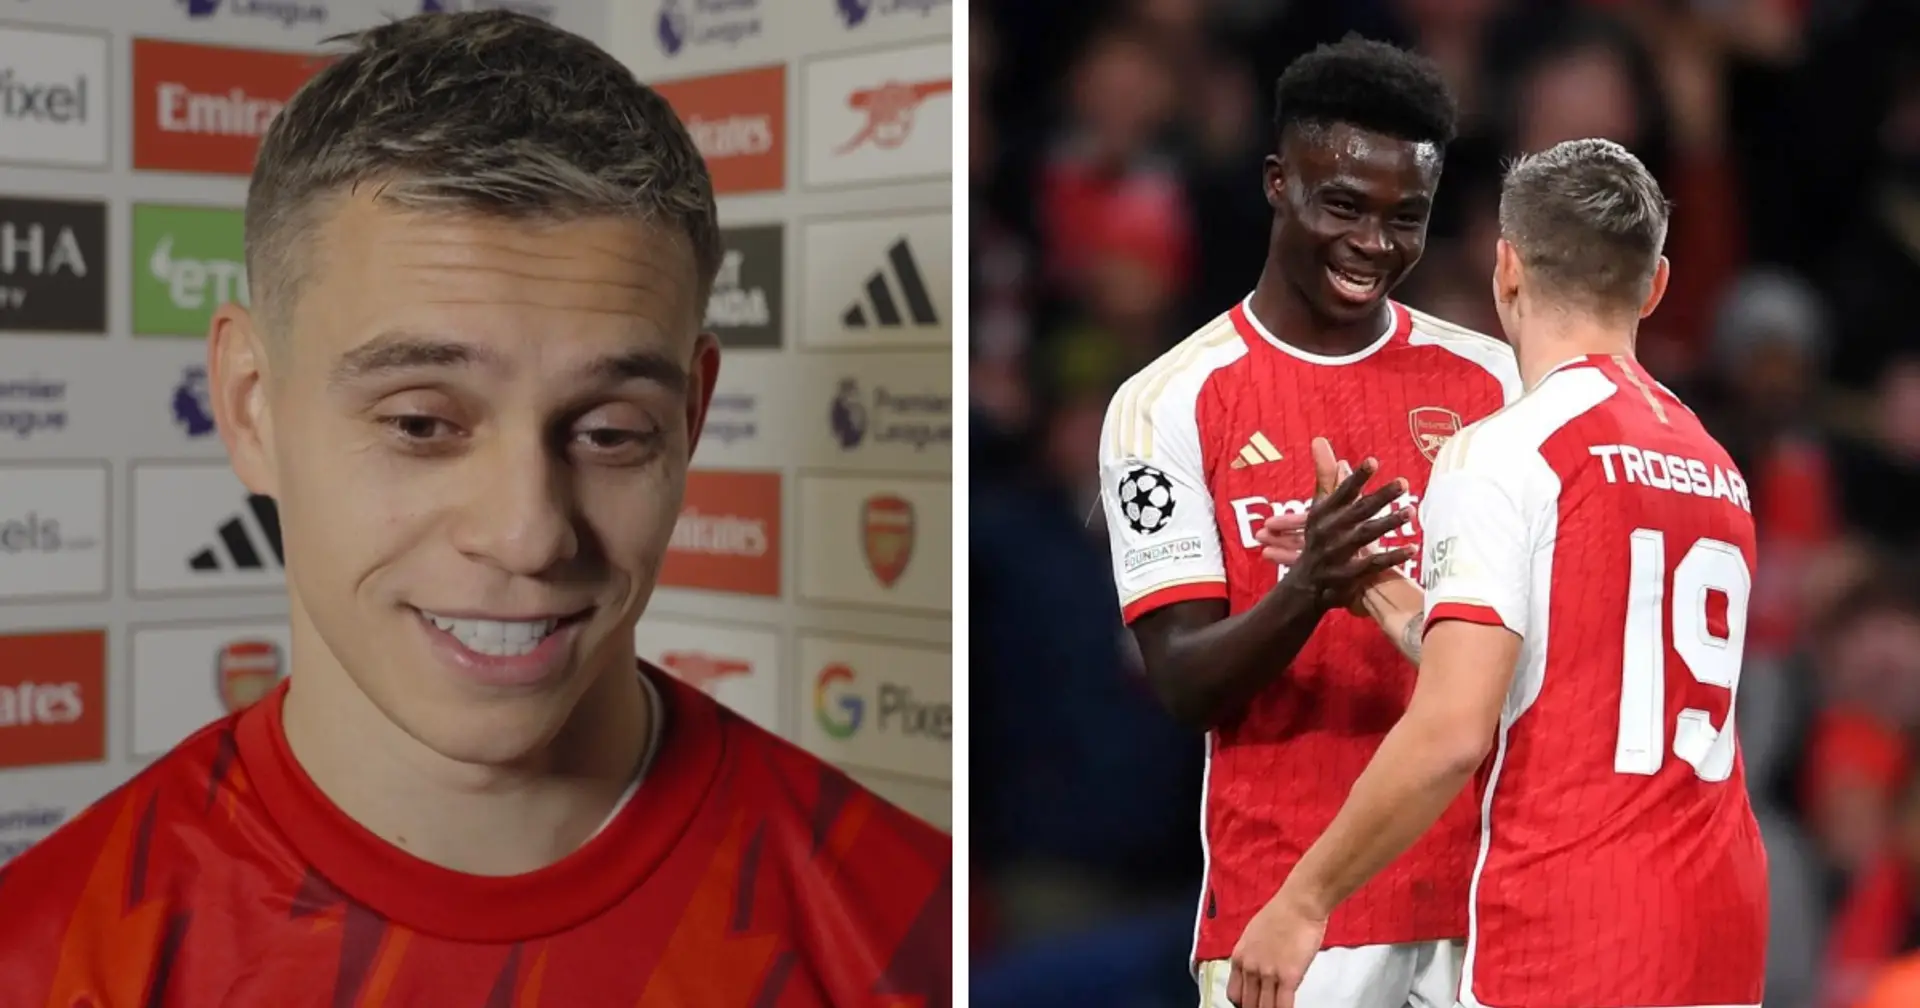 'I don’t know why': Trossard scores his 7th goal for Arsenal with all of them assisted by Saka